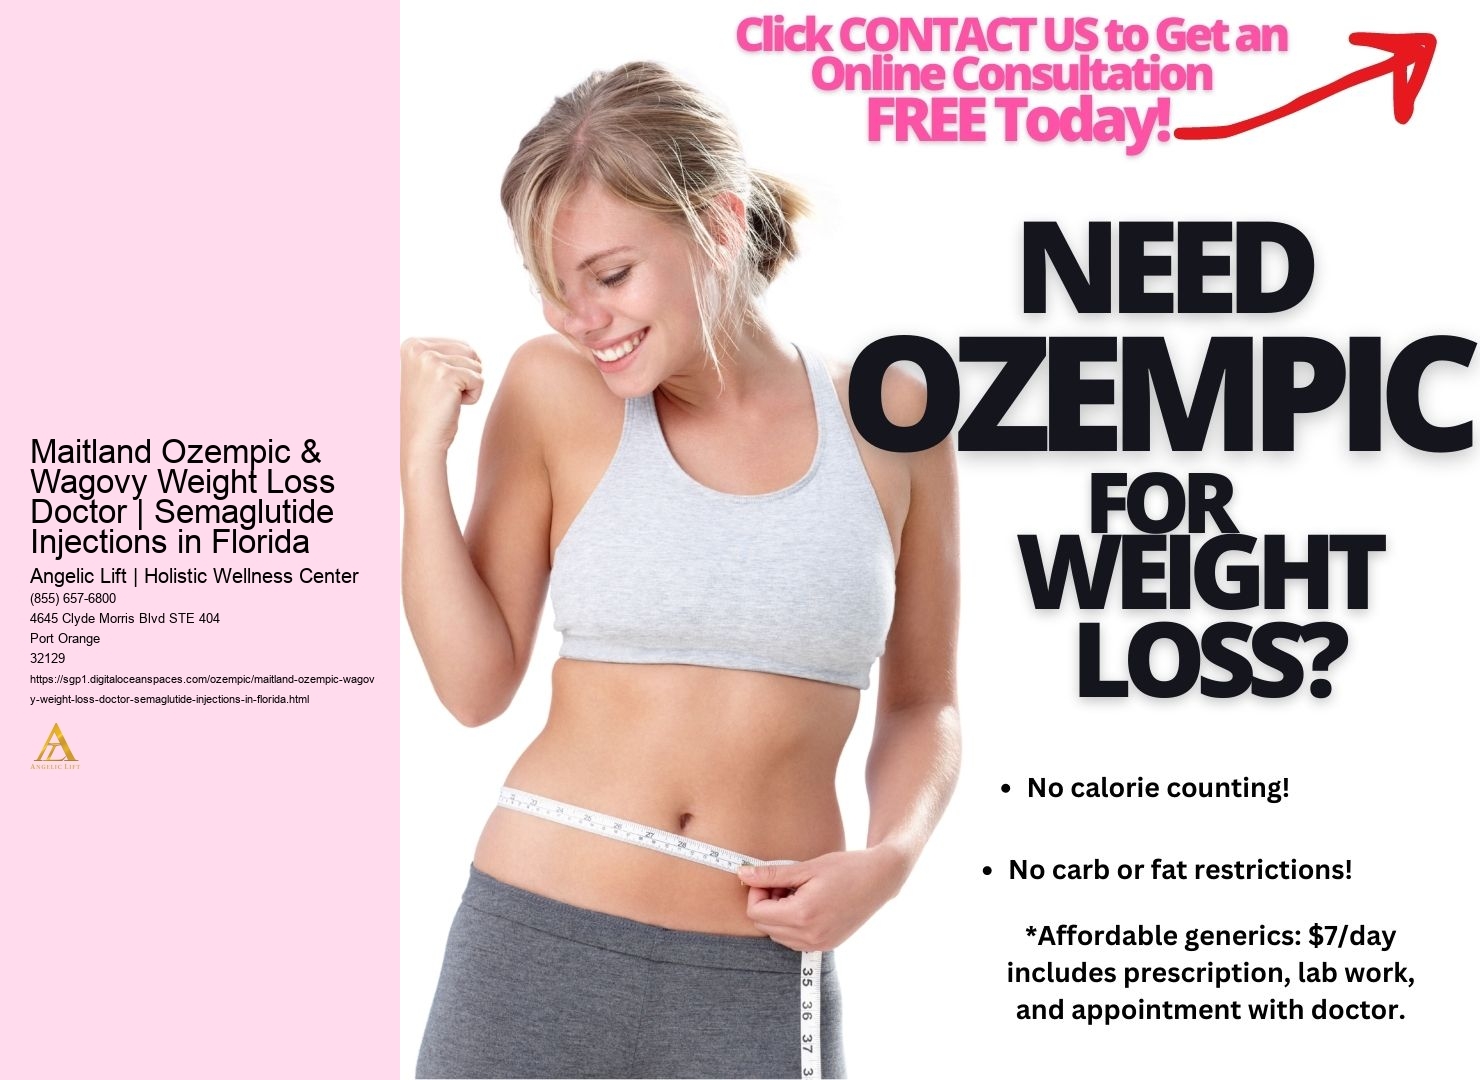 Maitland Ozempic & Wagovy Weight Loss Doctor | Semaglutide Injections in Florida